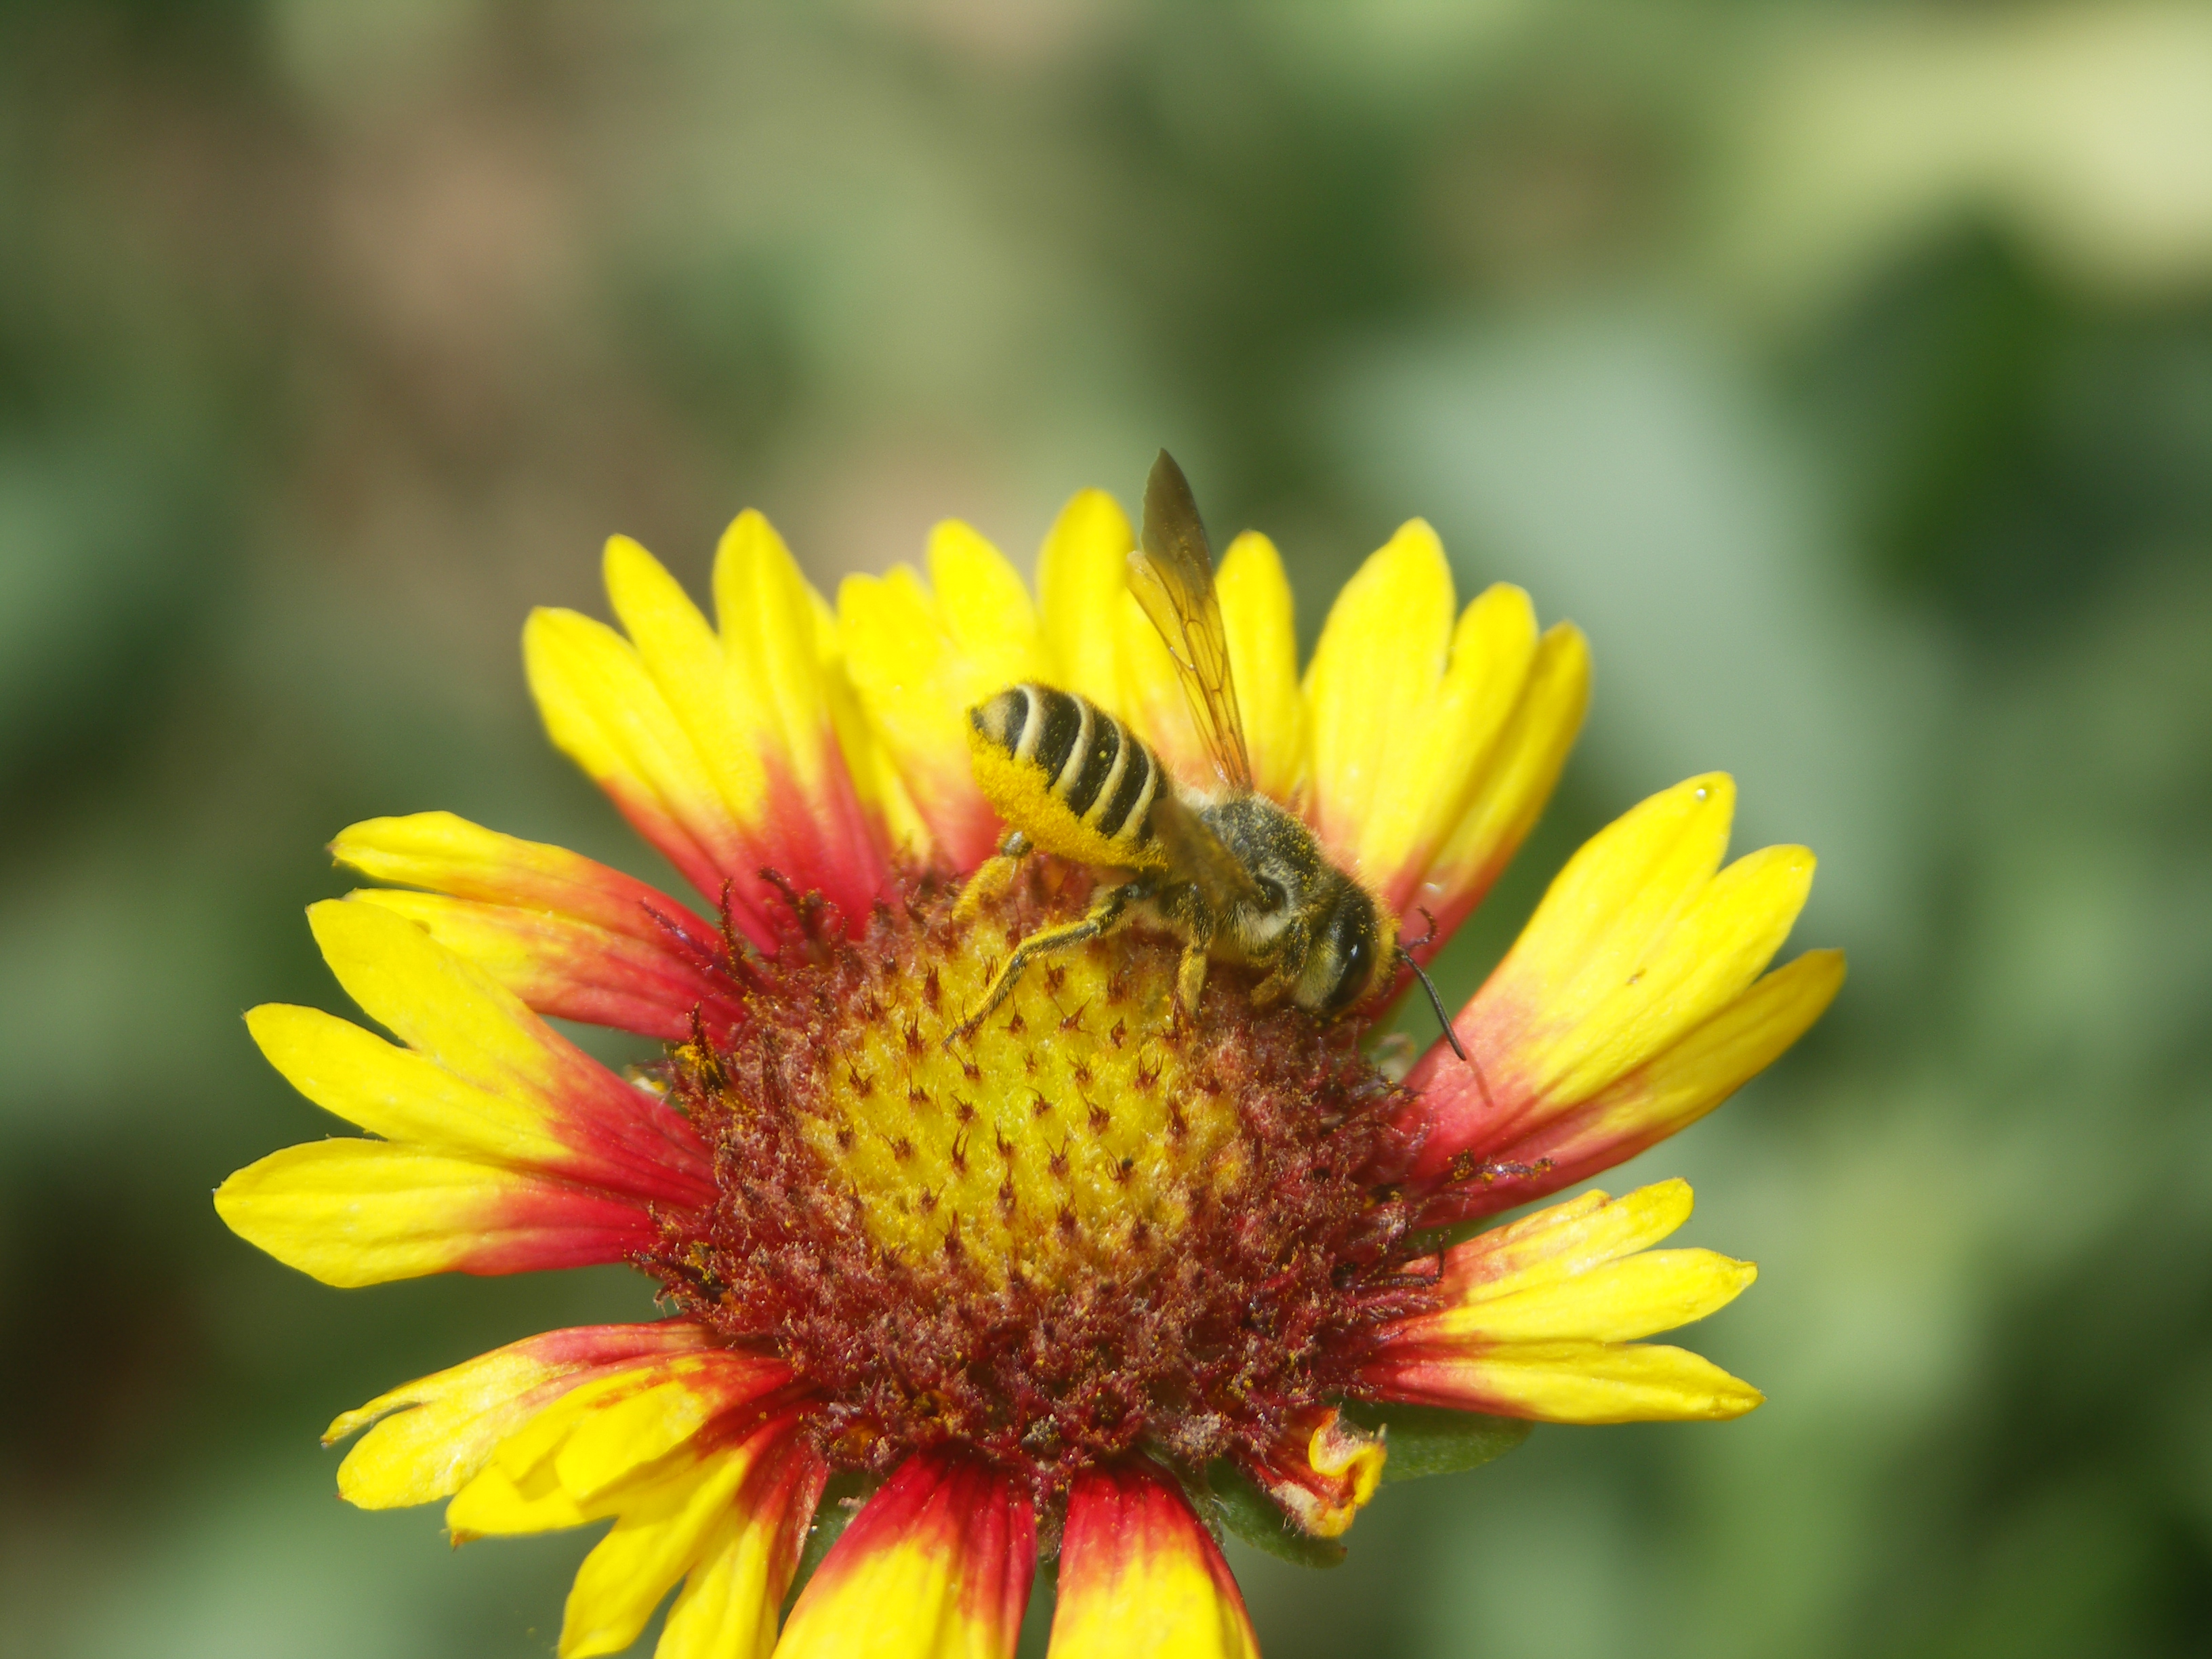 Leafcutter bee on red and yellow colored blanketflower